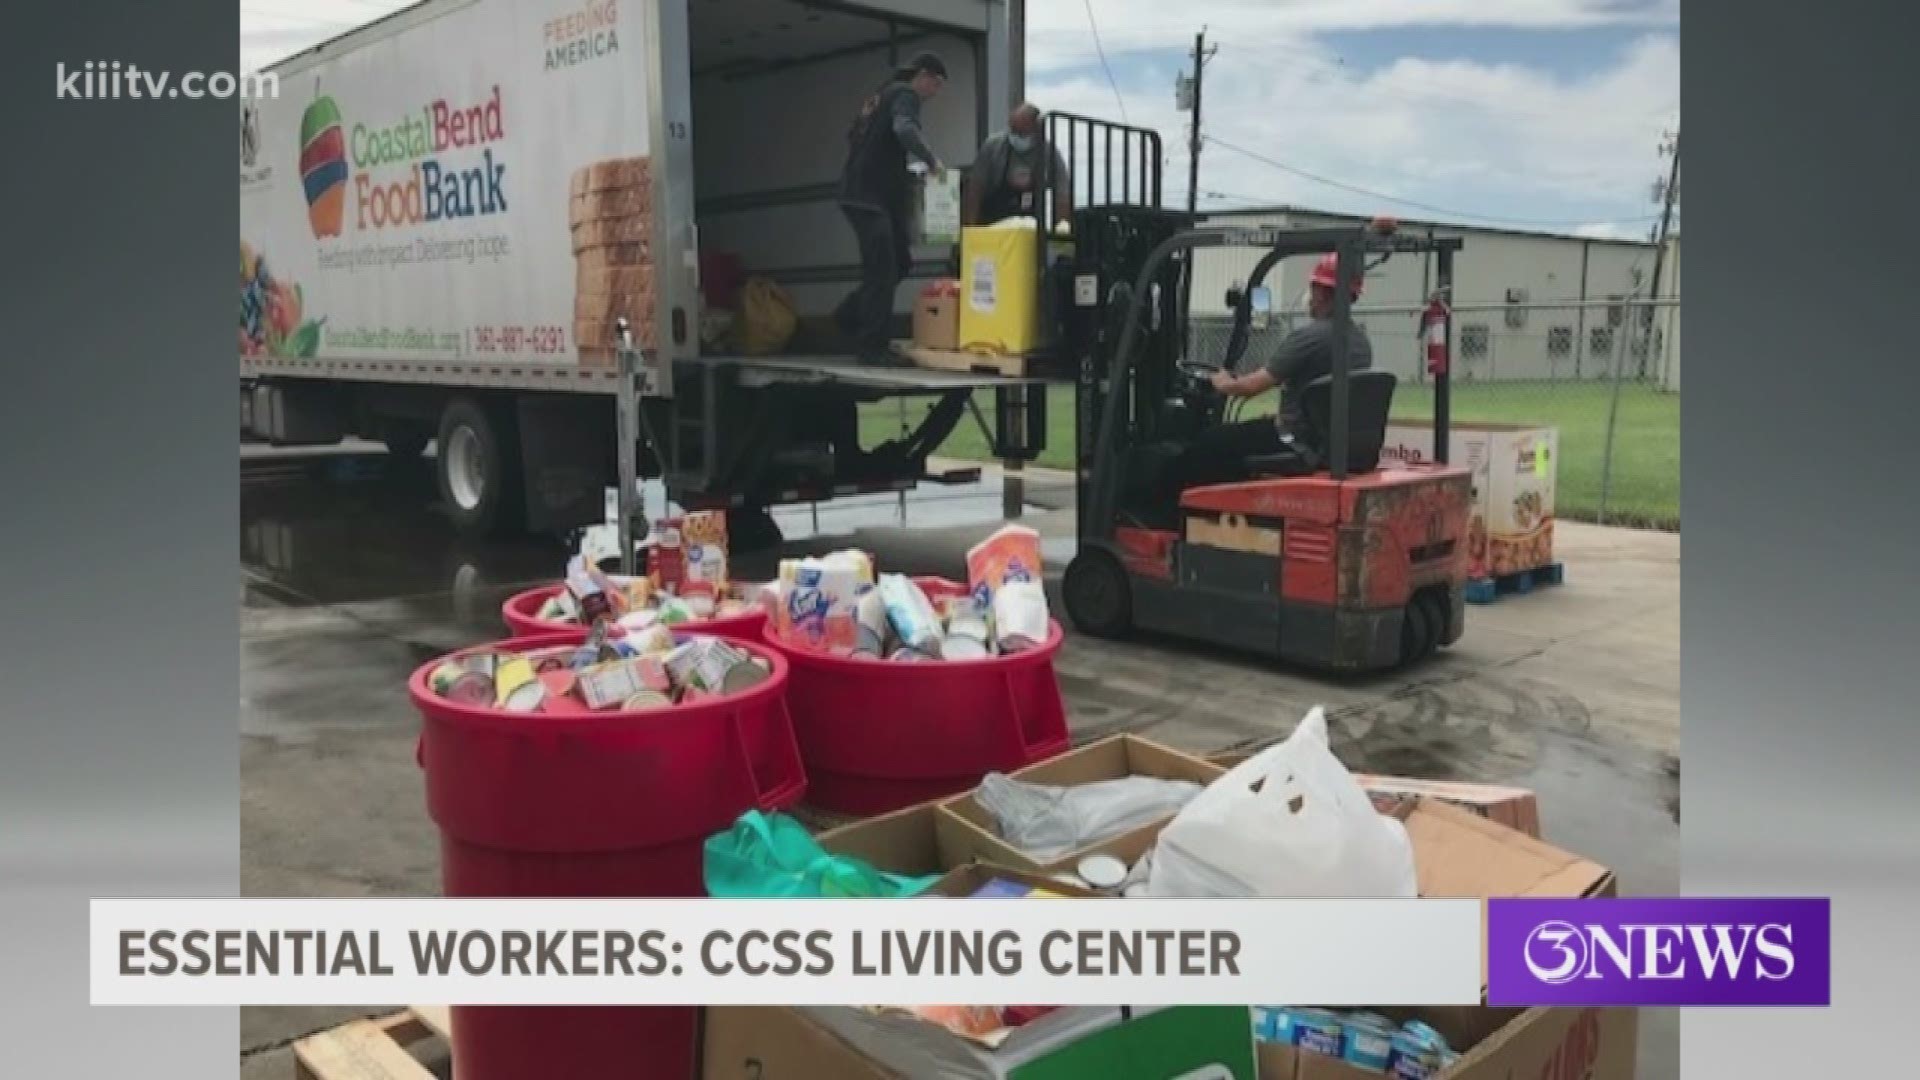 3News had a chance to speak with Lori Garcia, the community relations director at the Corpus Christi State Supported Living Center.